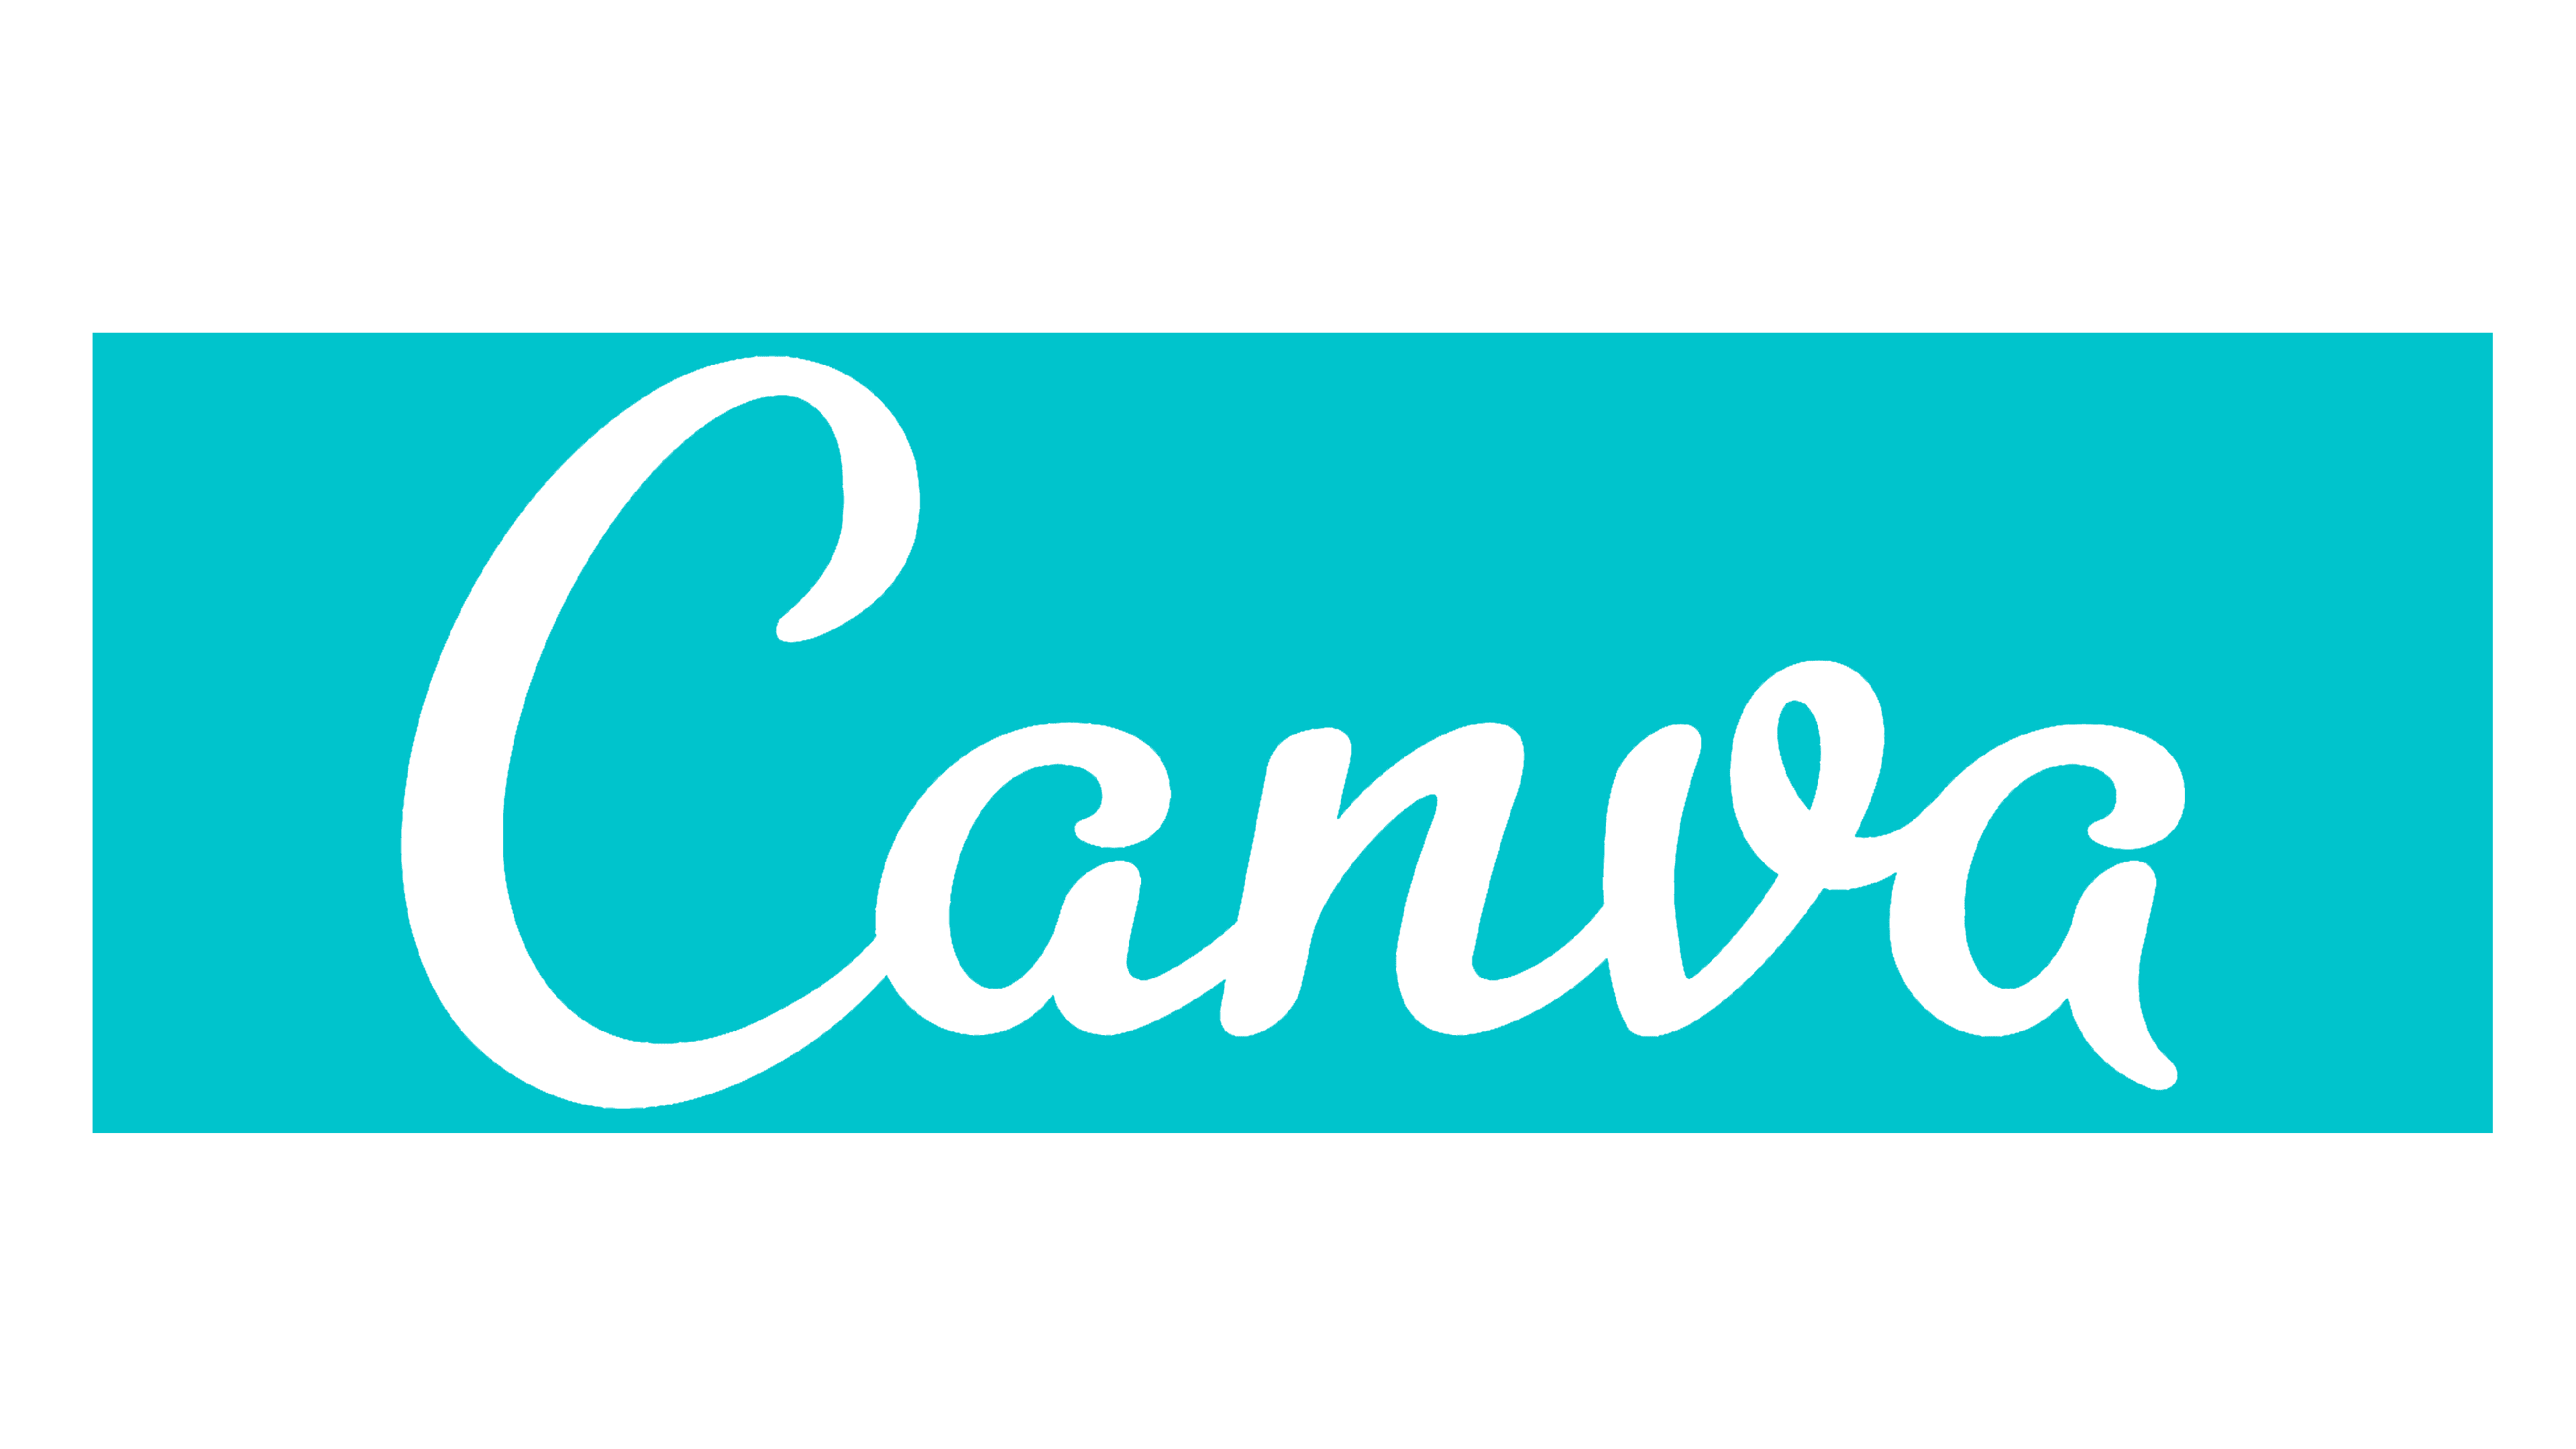 about-canva-company-archives-page-2-of-9-canva-templates